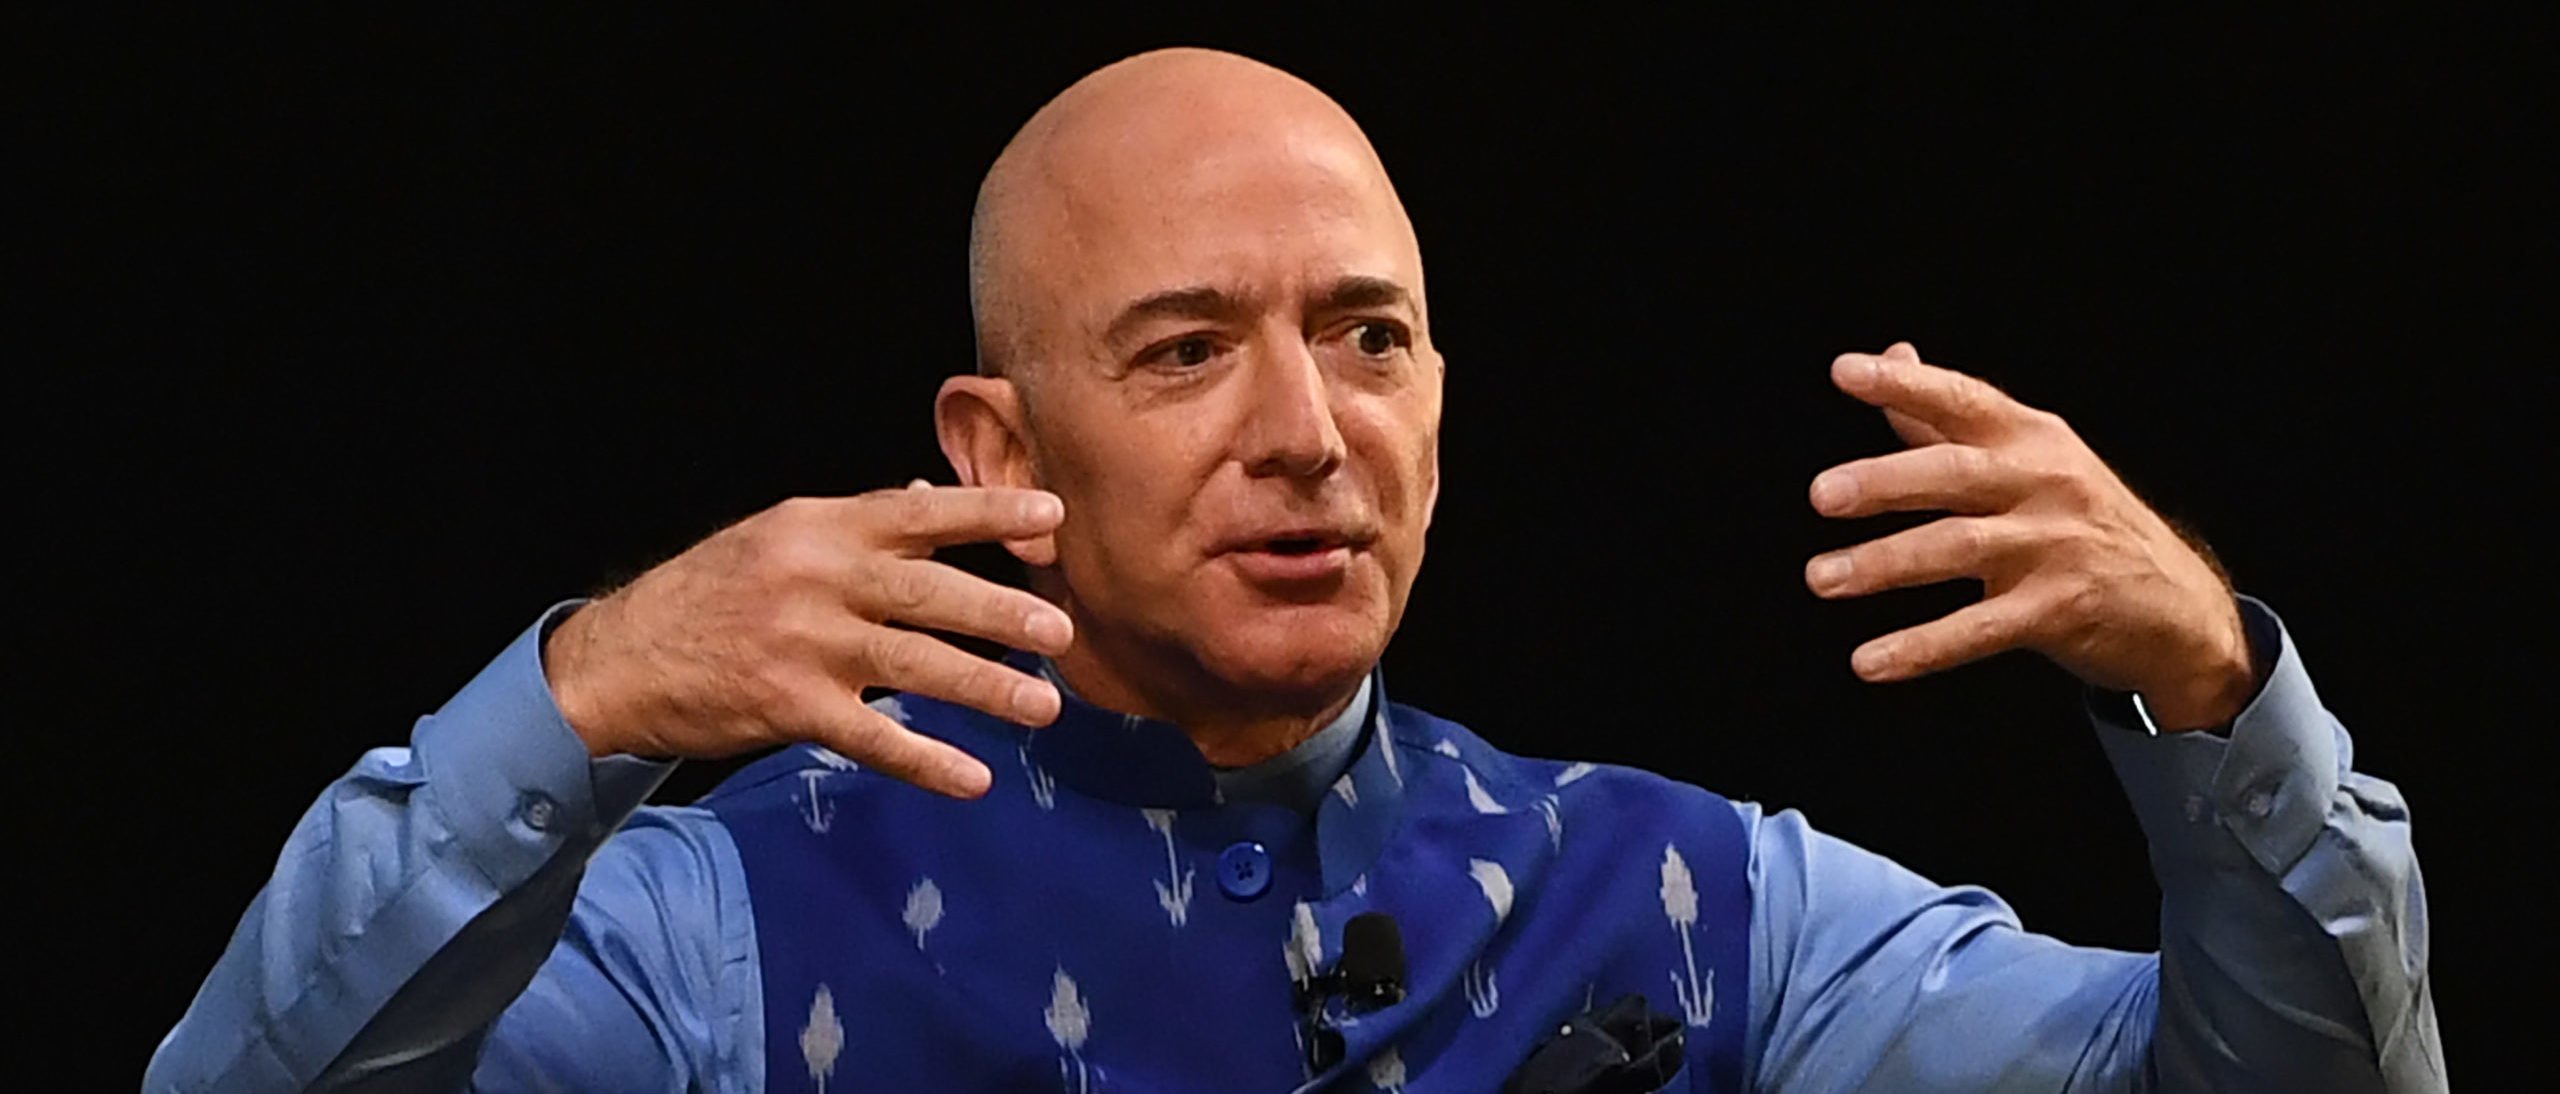 Amazon, owned by Bezos, is against the bid for the Union election